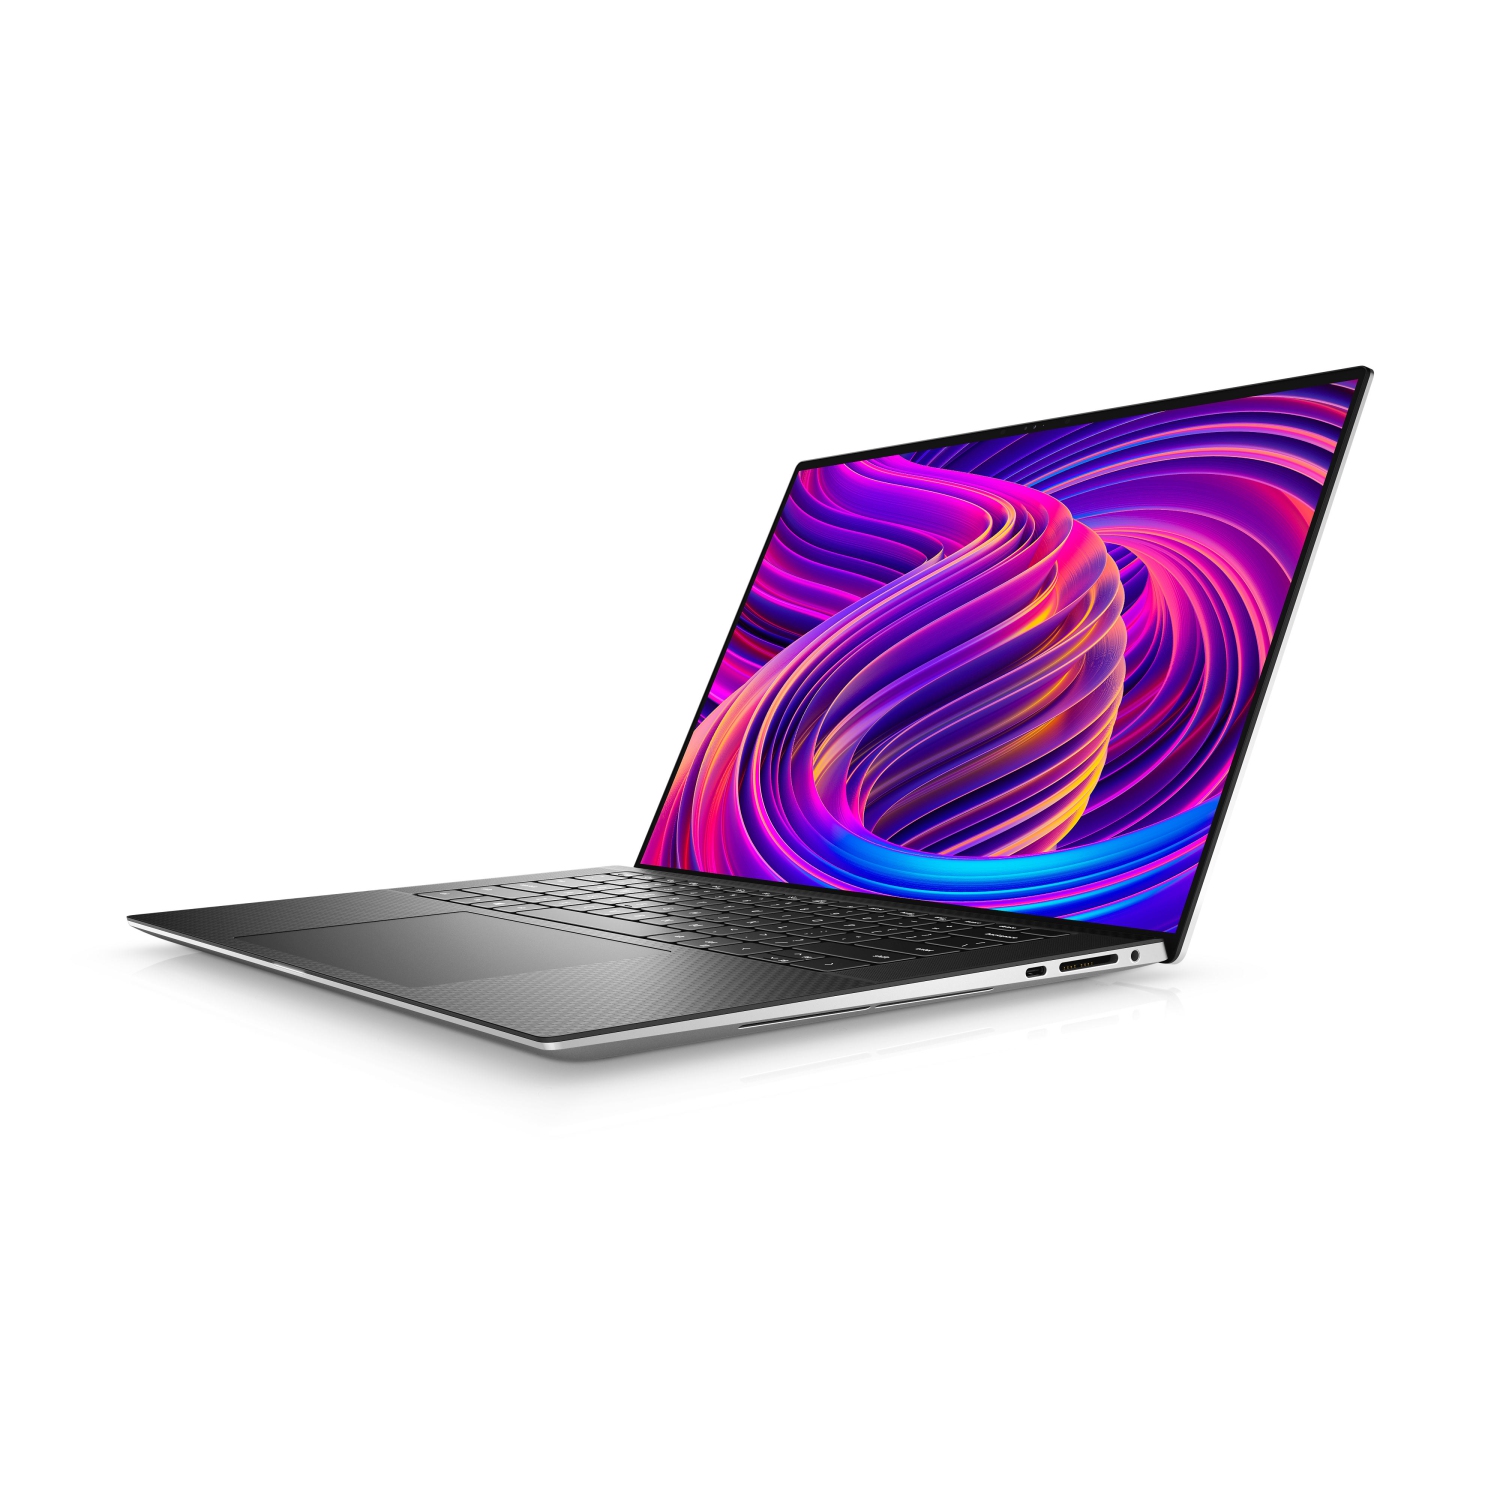 Refurbished (Excellent) - Dell XPS 15 9510 Laptop (2021) | 15.6" FHD+ | Core i7 - 2TB SSD - 64GB RAM - 3050 Ti | 8 Cores @ 4.6 GHz - 11th Gen CPU Certified Refurbished